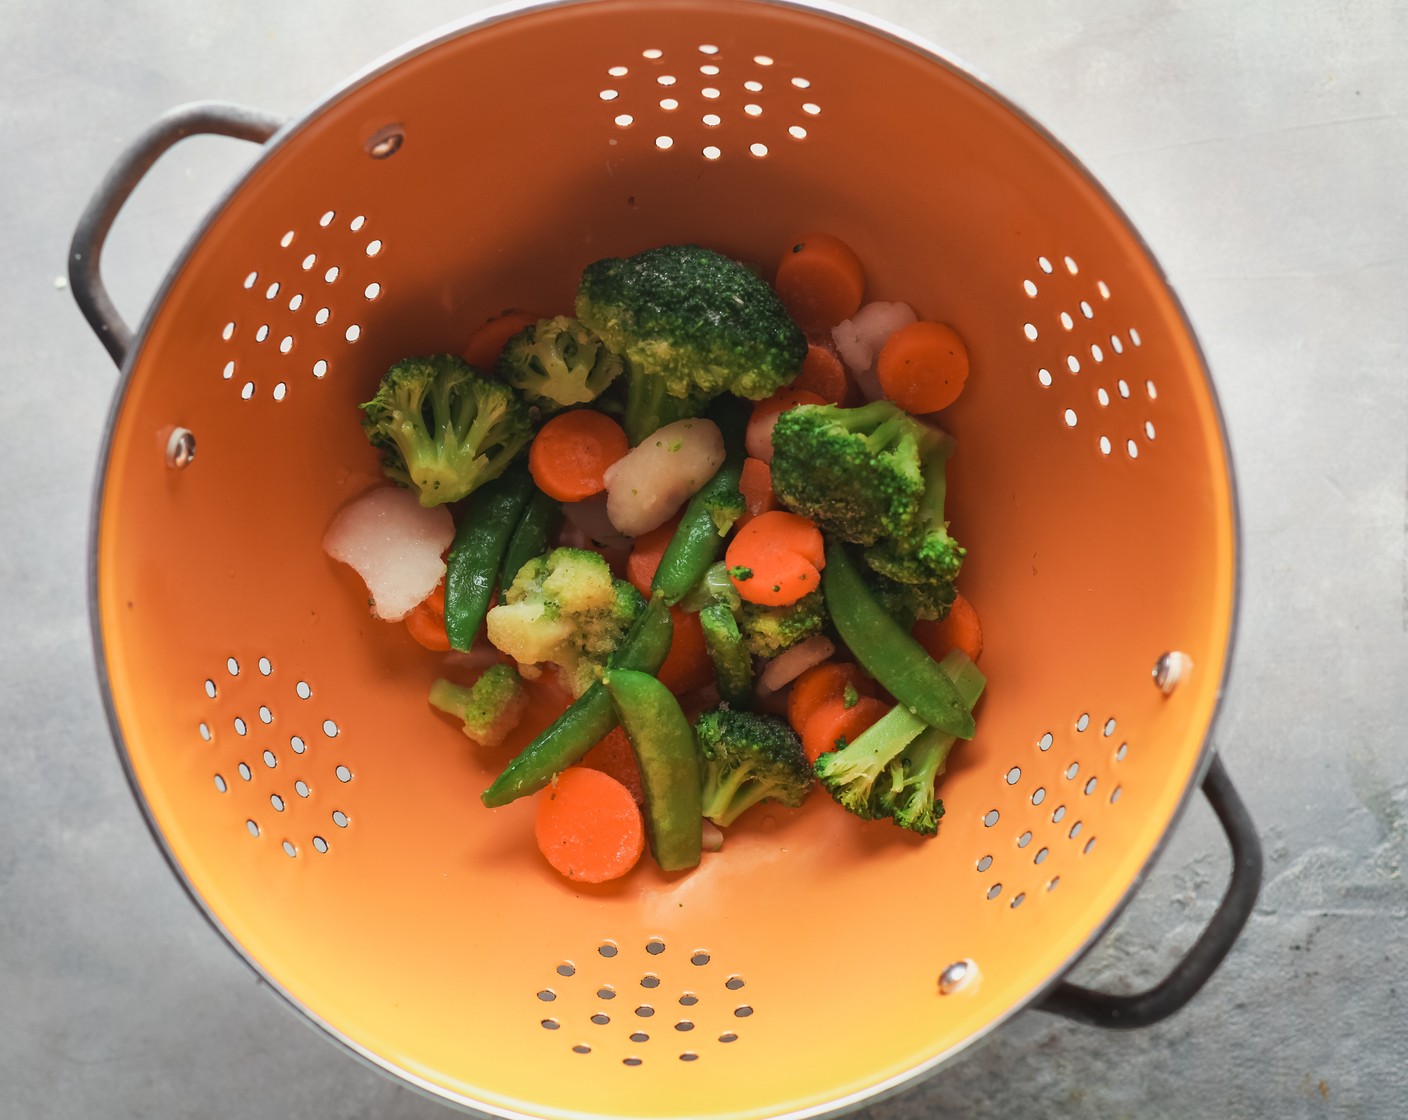 step 3 Place a colander in the sink. Add the Frozen Mixed Vegetables (1 bag) to the colander.